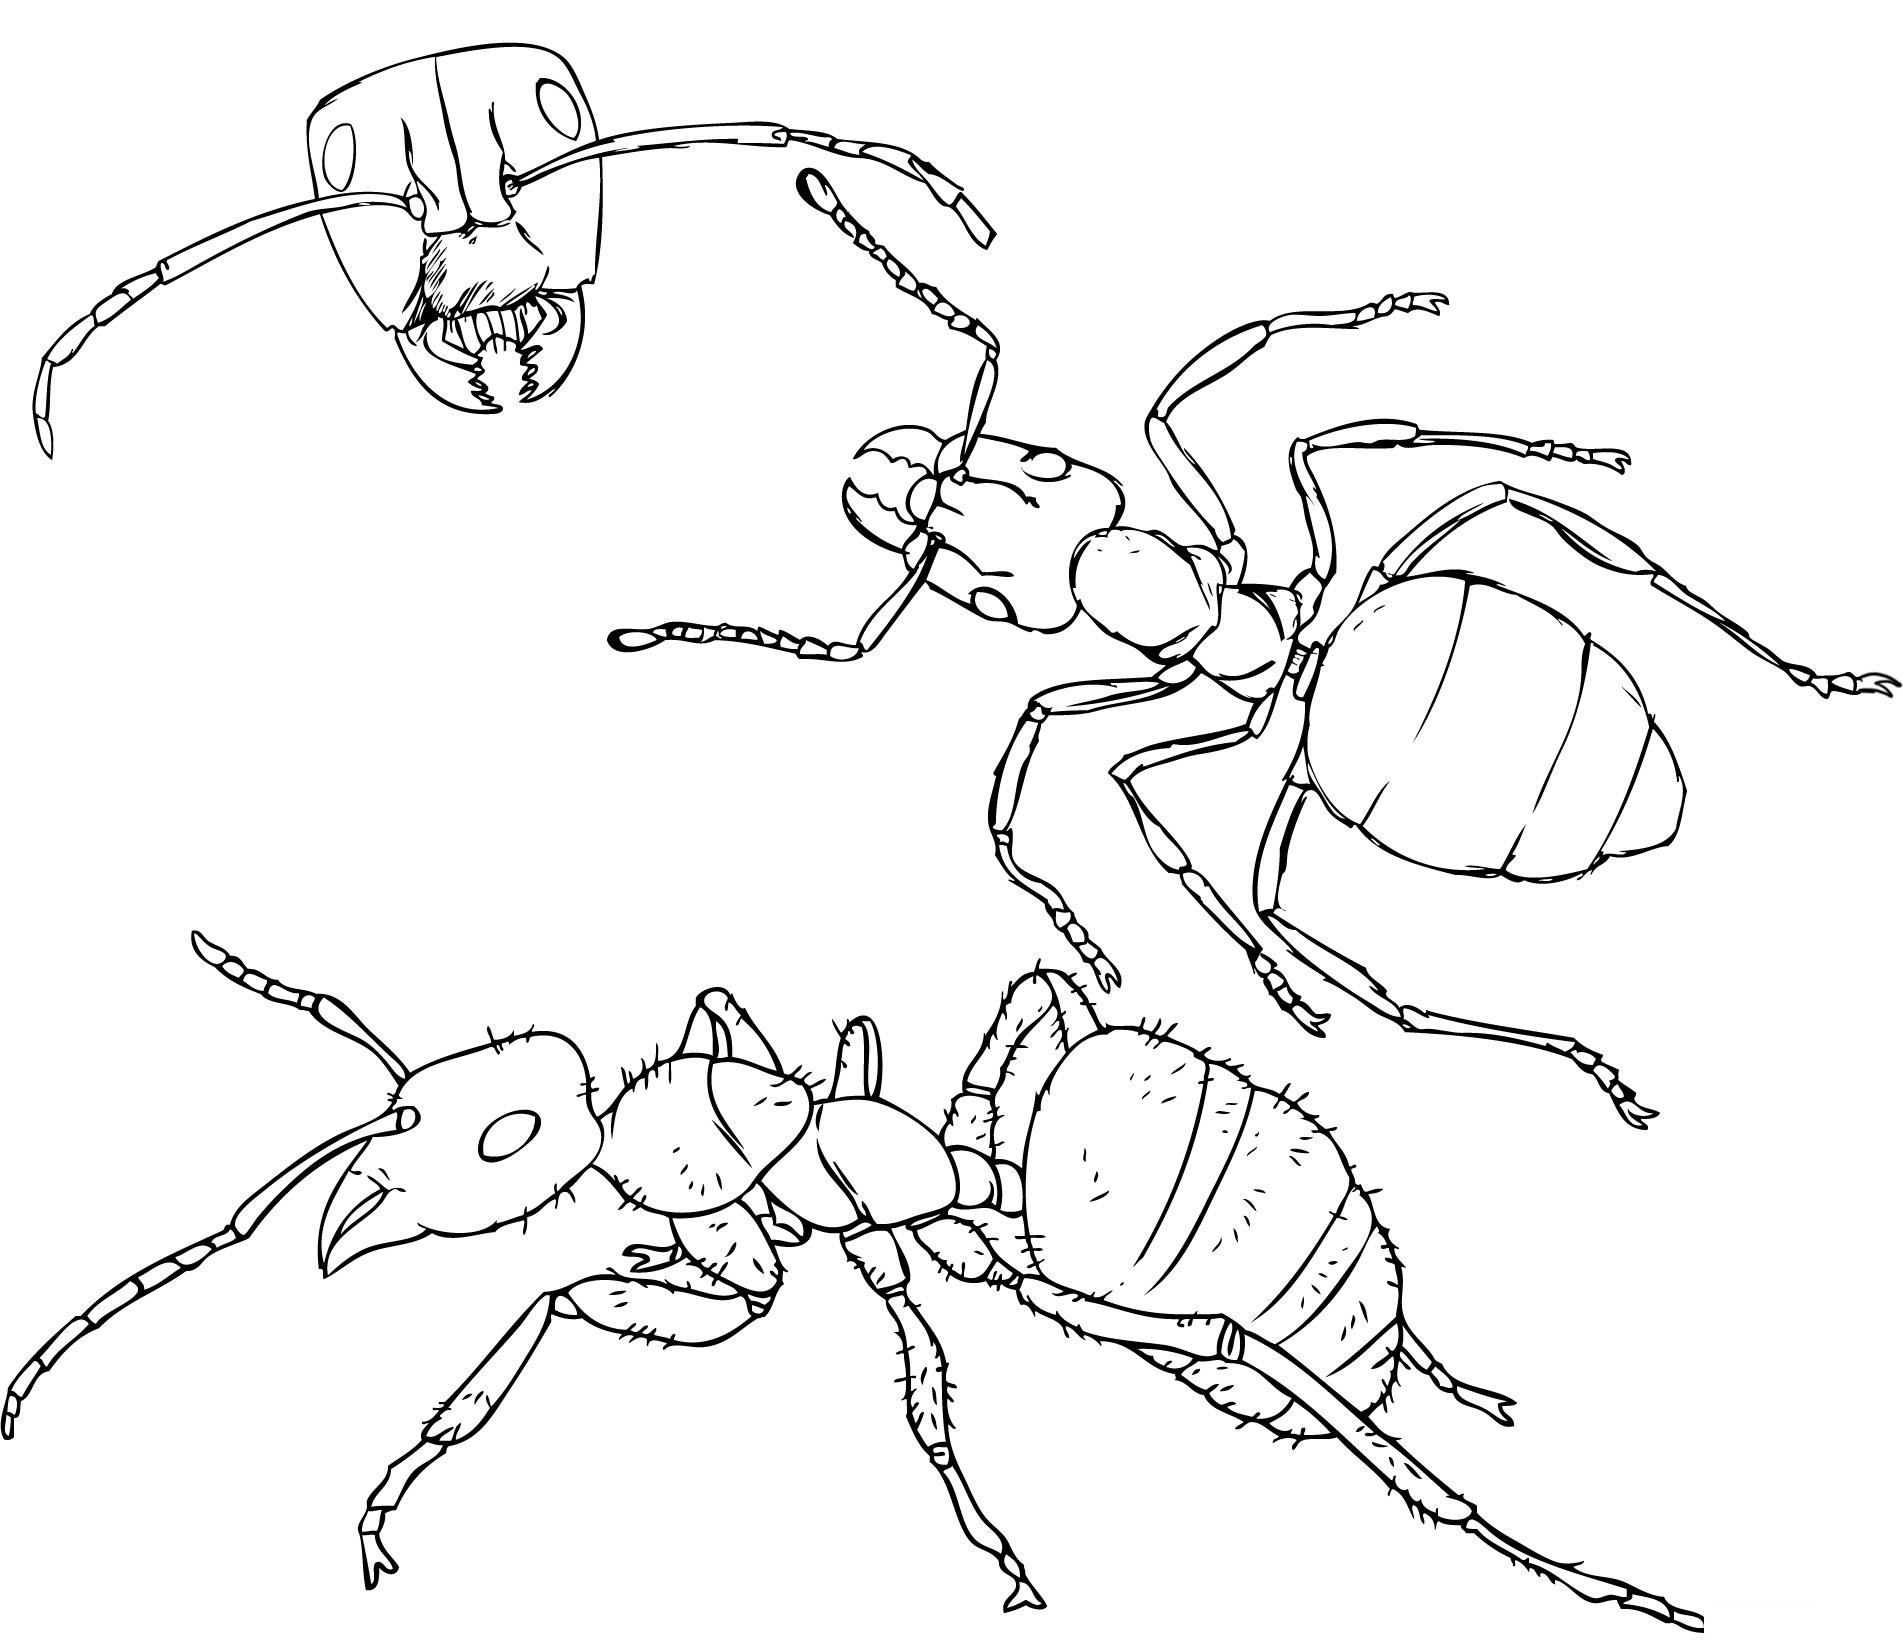 Ants coloring #2, Download drawings